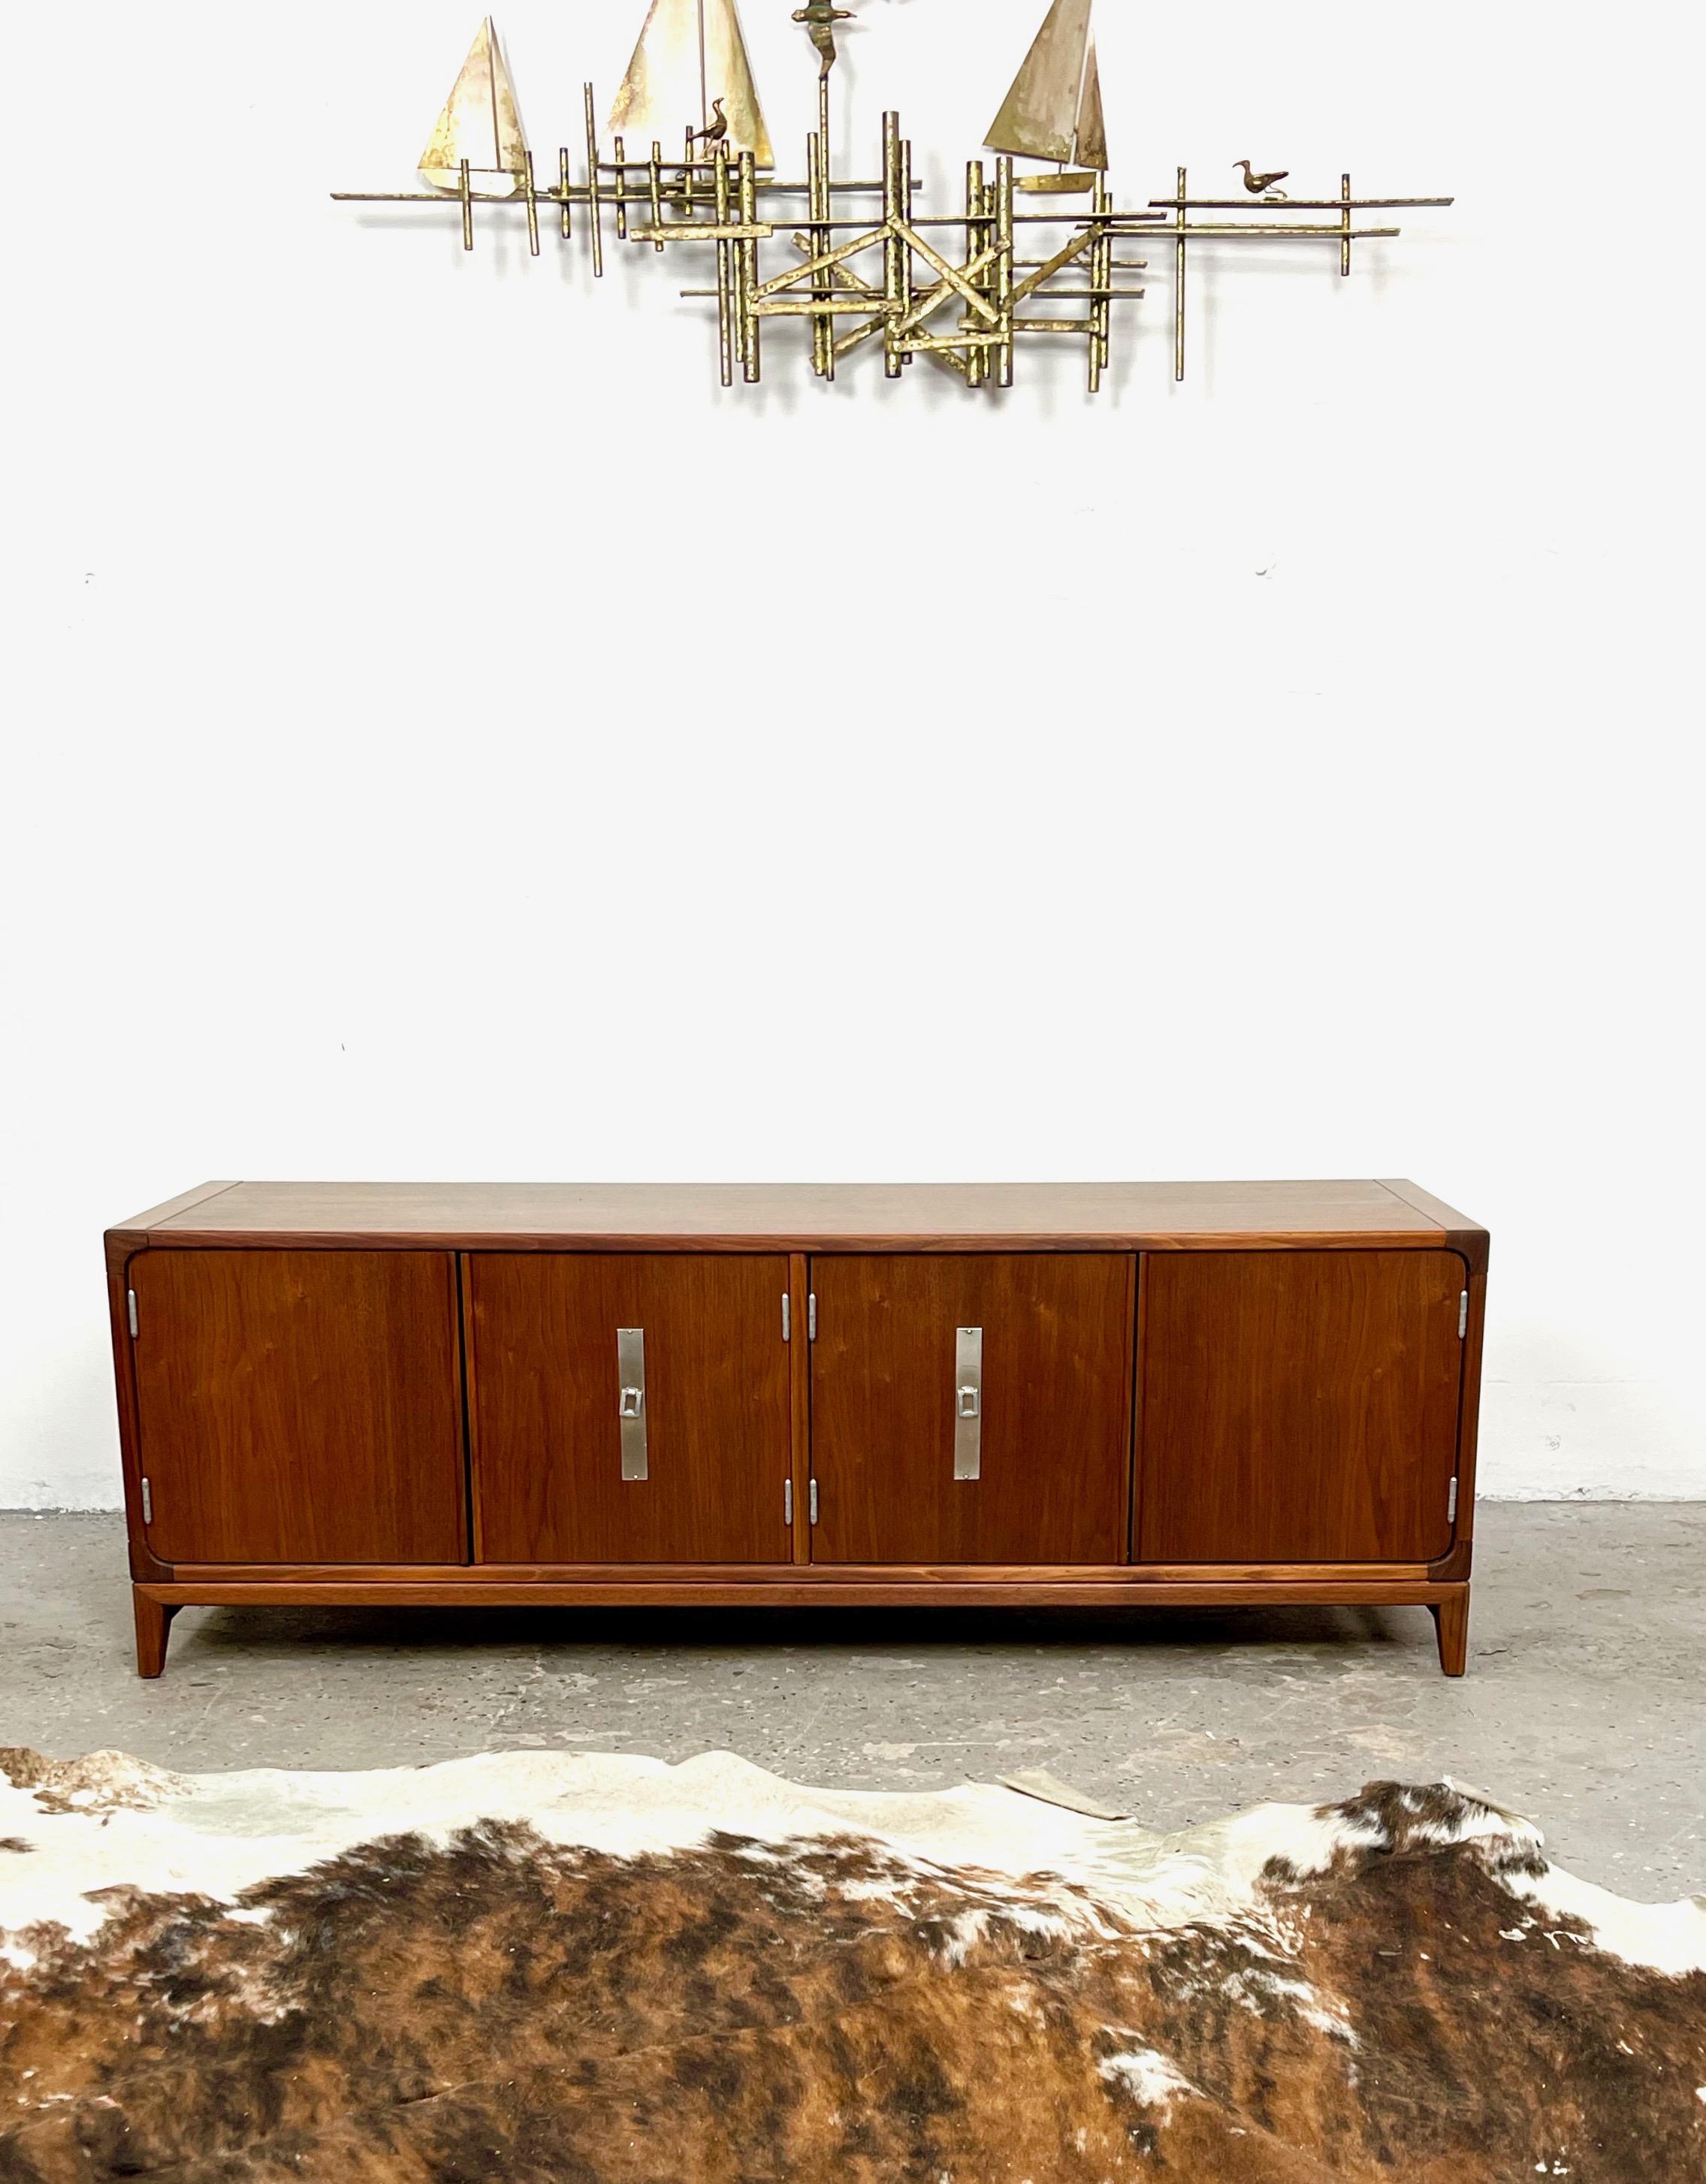 North American John Keal Brown-Saltman Mid-Century Modern Low Credenza, Record, Stereo Cabinet